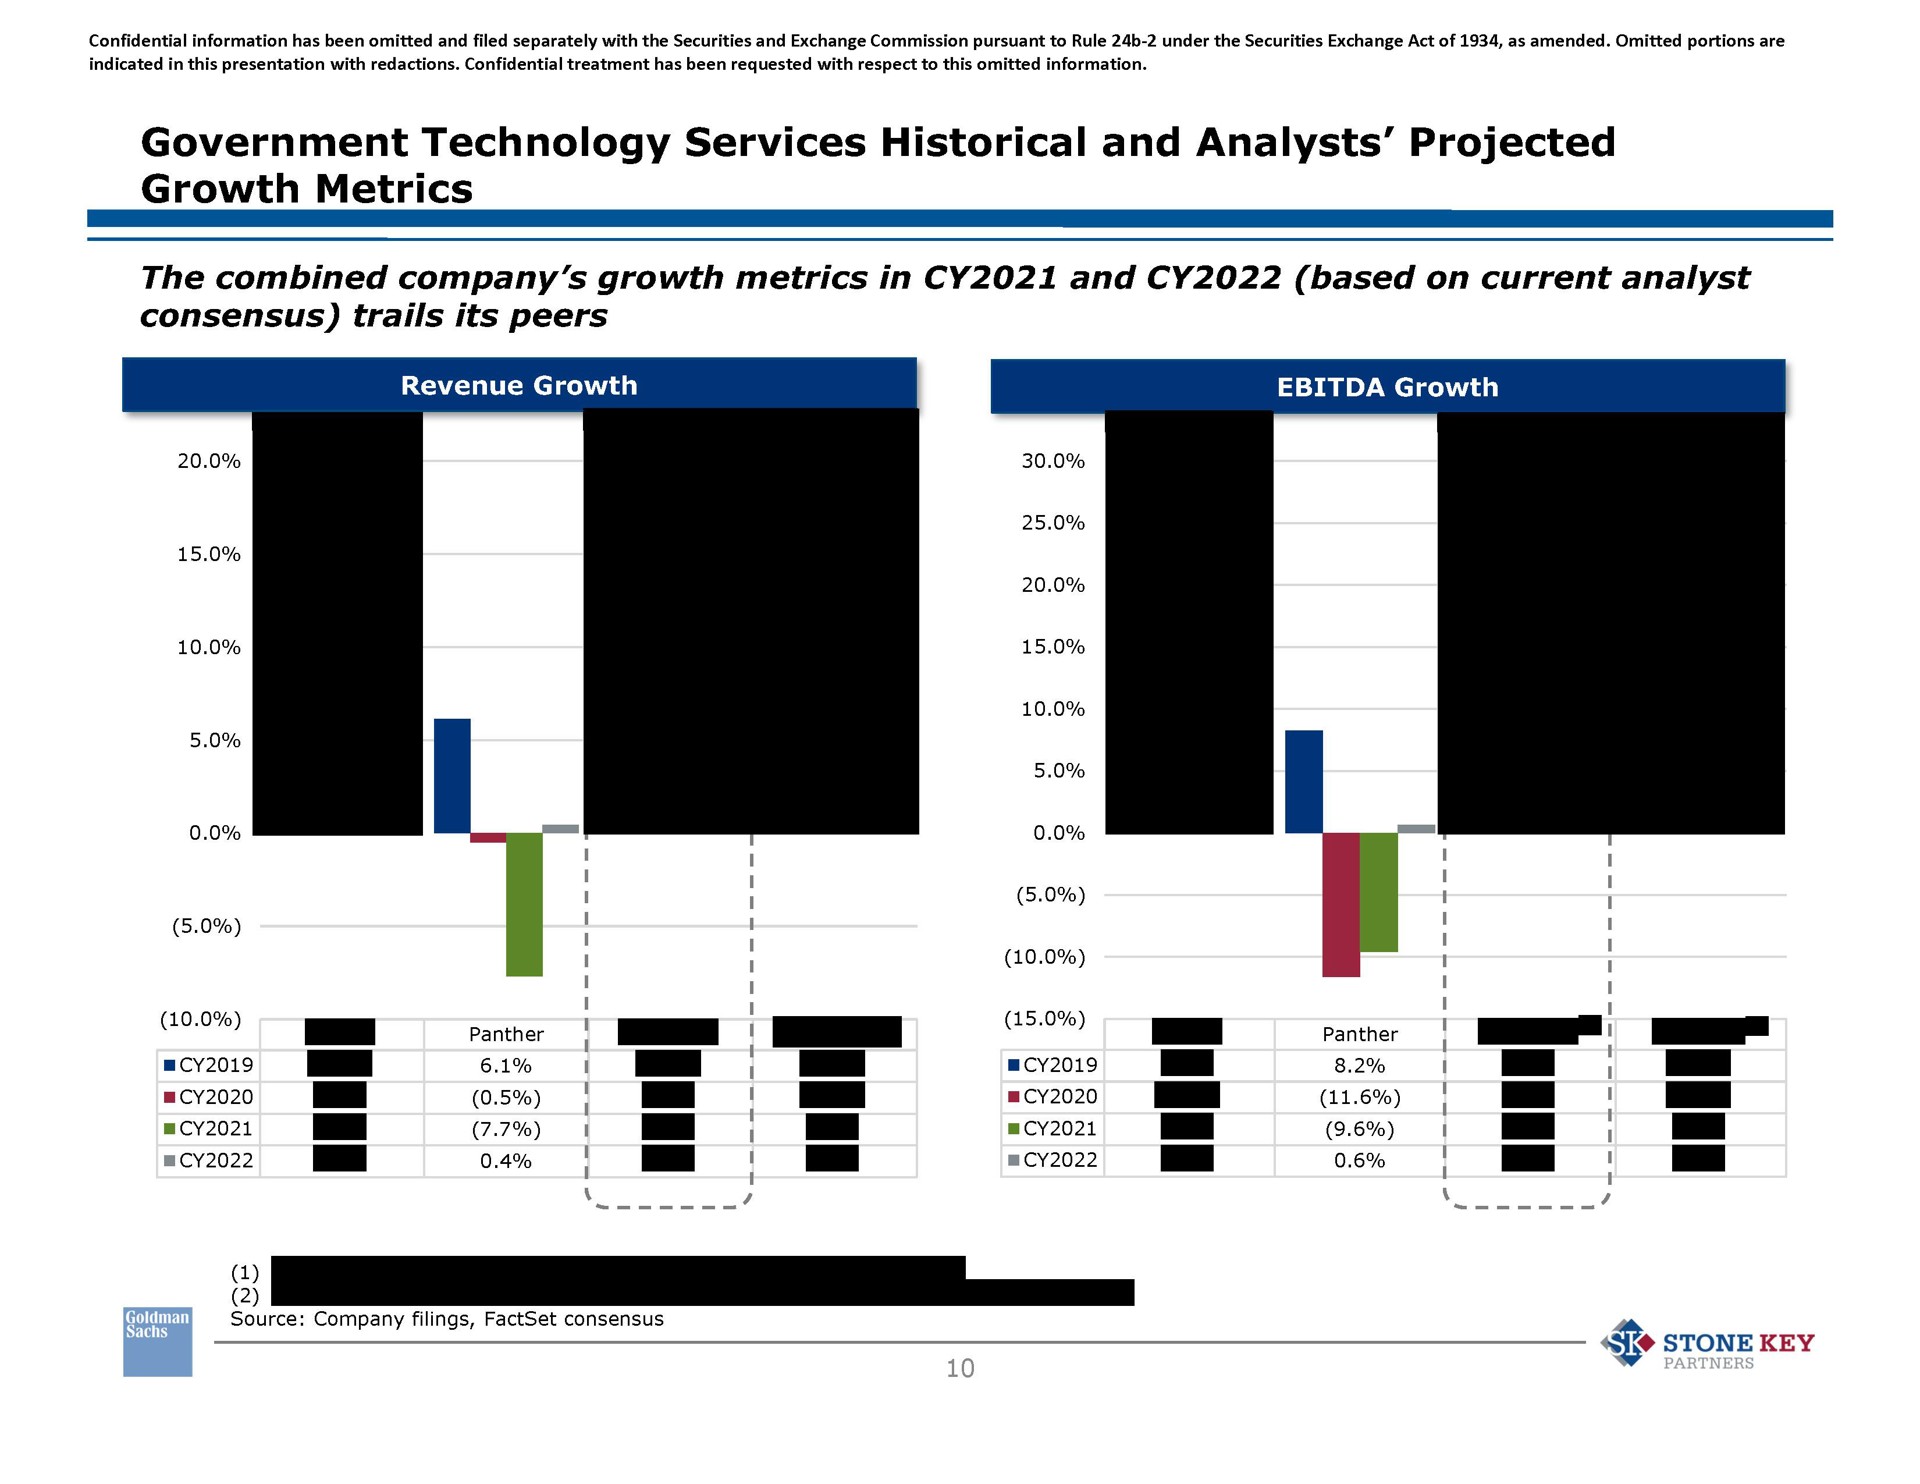 government technology services historical and analysts projected growth metrics the combined company growth metrics in and based on current analyst consensus trails its peers revenue growth growth i a panther i i i i i i i sig stone key | Goldman Sachs